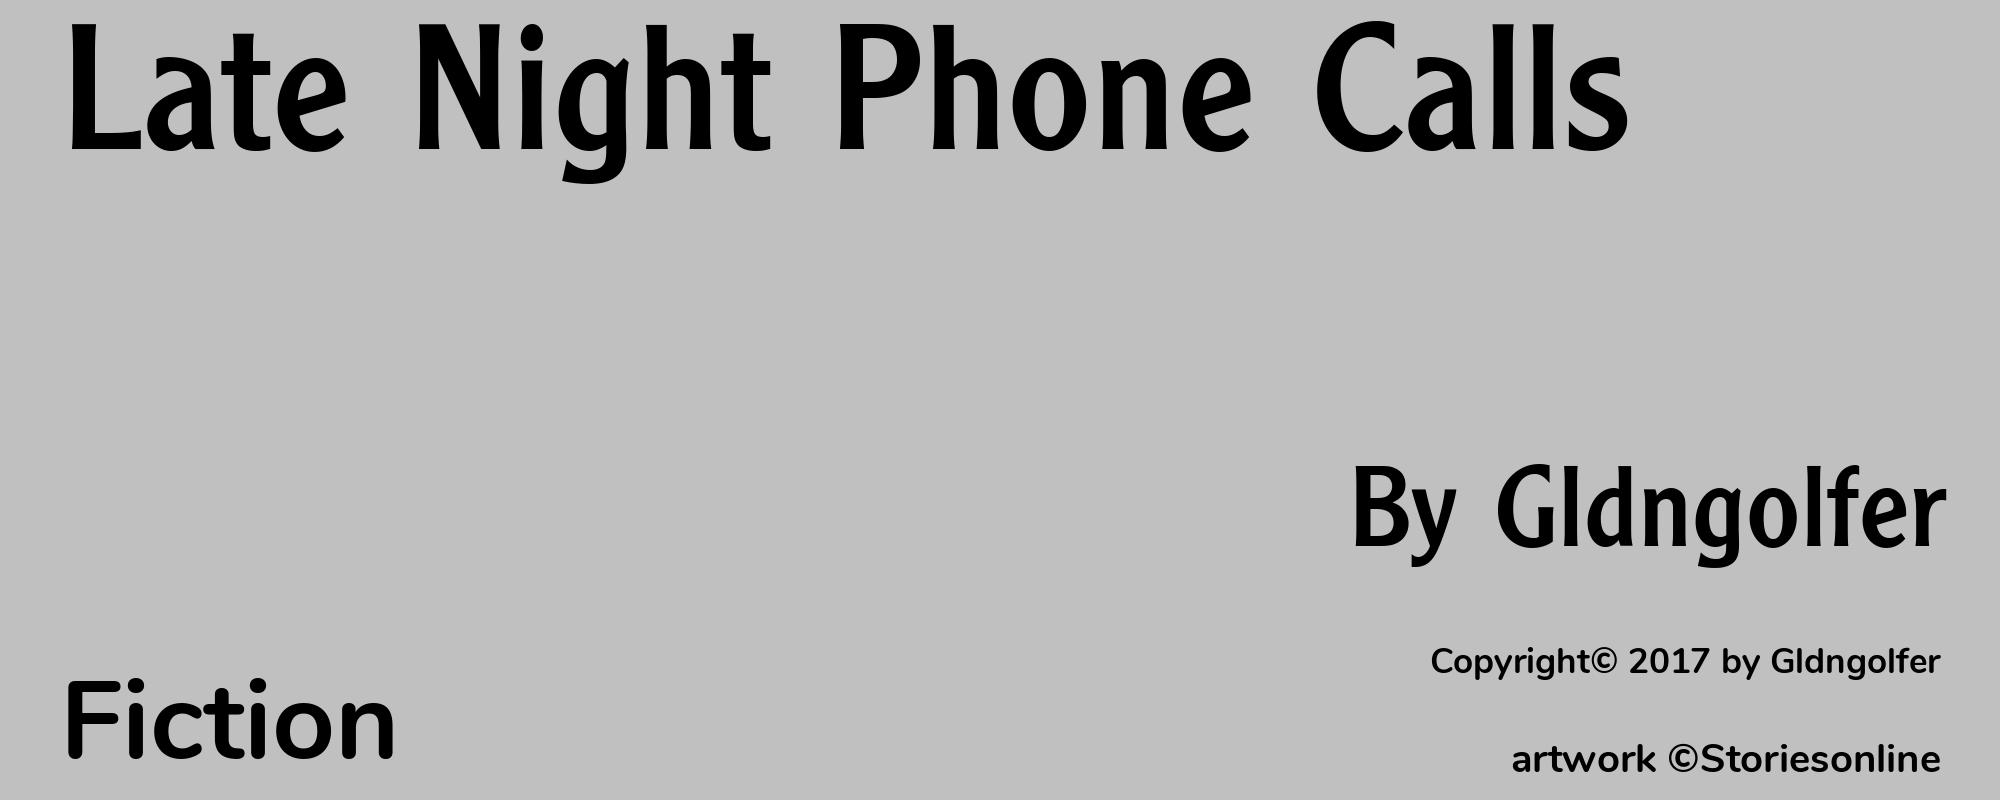 Late Night Phone Calls - Cover